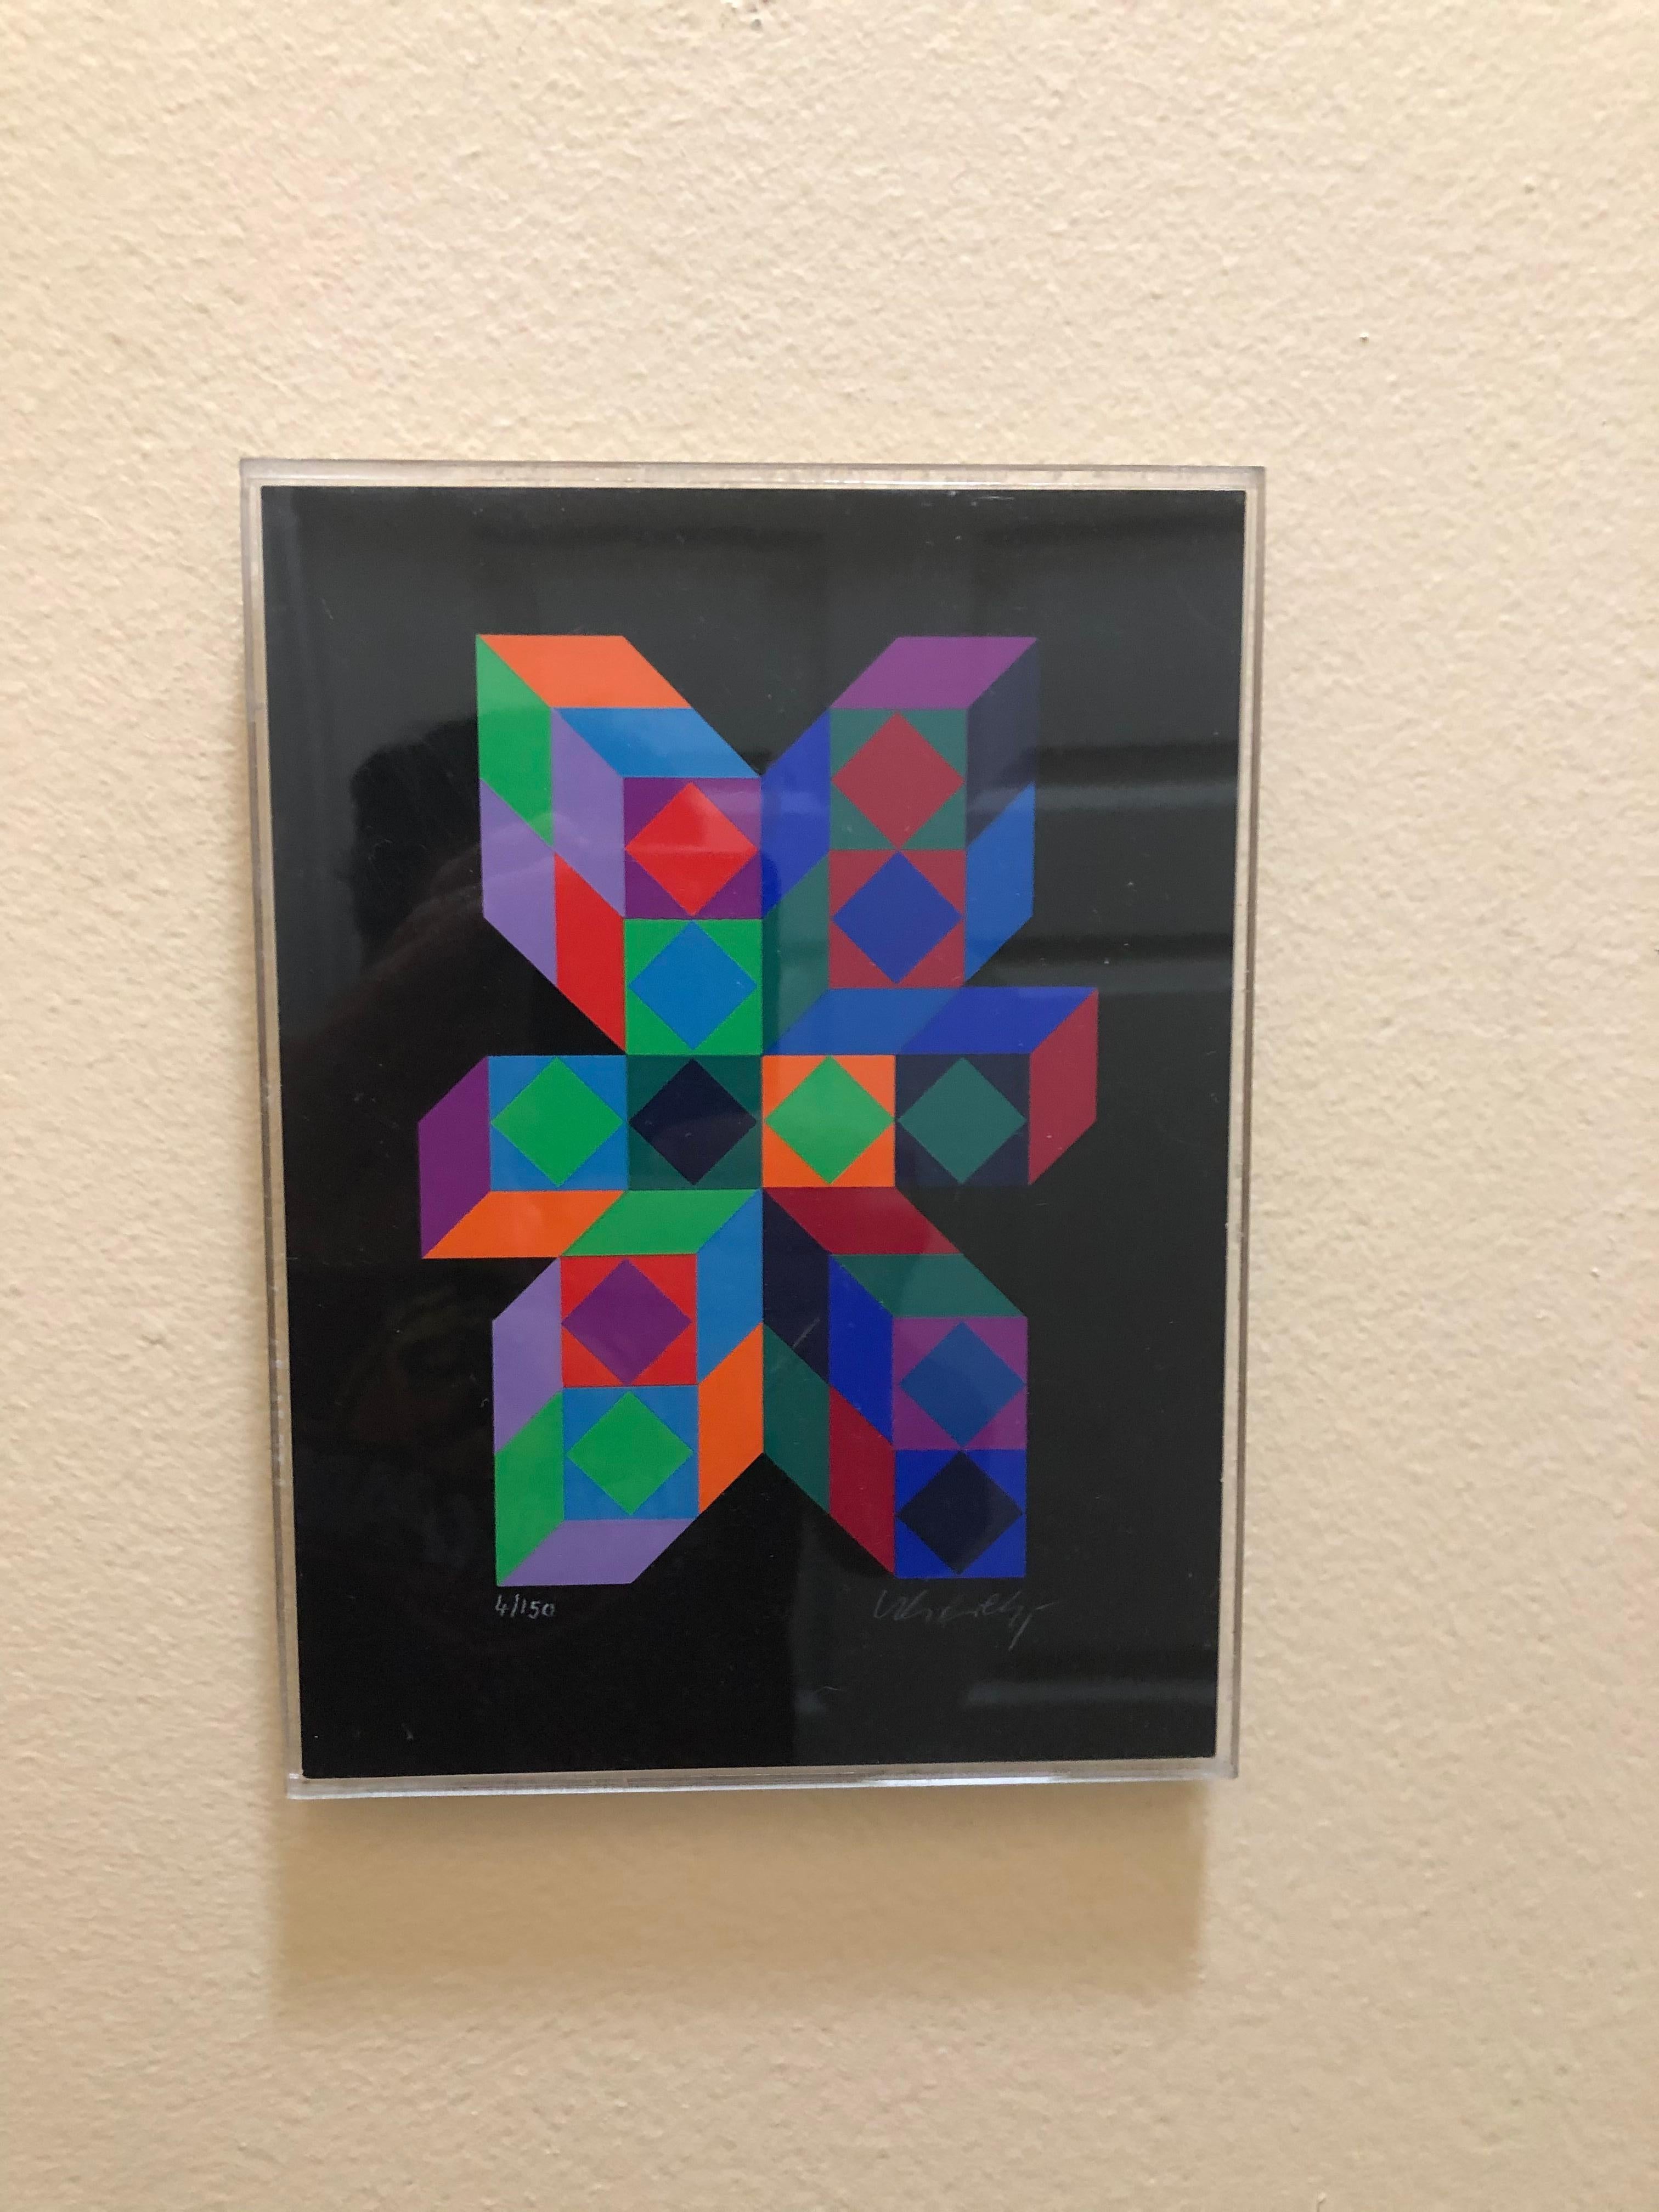 Victor Vasarely: 1906-1997. Well listed Hungarian French artist with auction results for a single print over $100,000. He is considered the grandfather of the op art movement. Size doesn’t always matter and this is one of those examples. Powerful